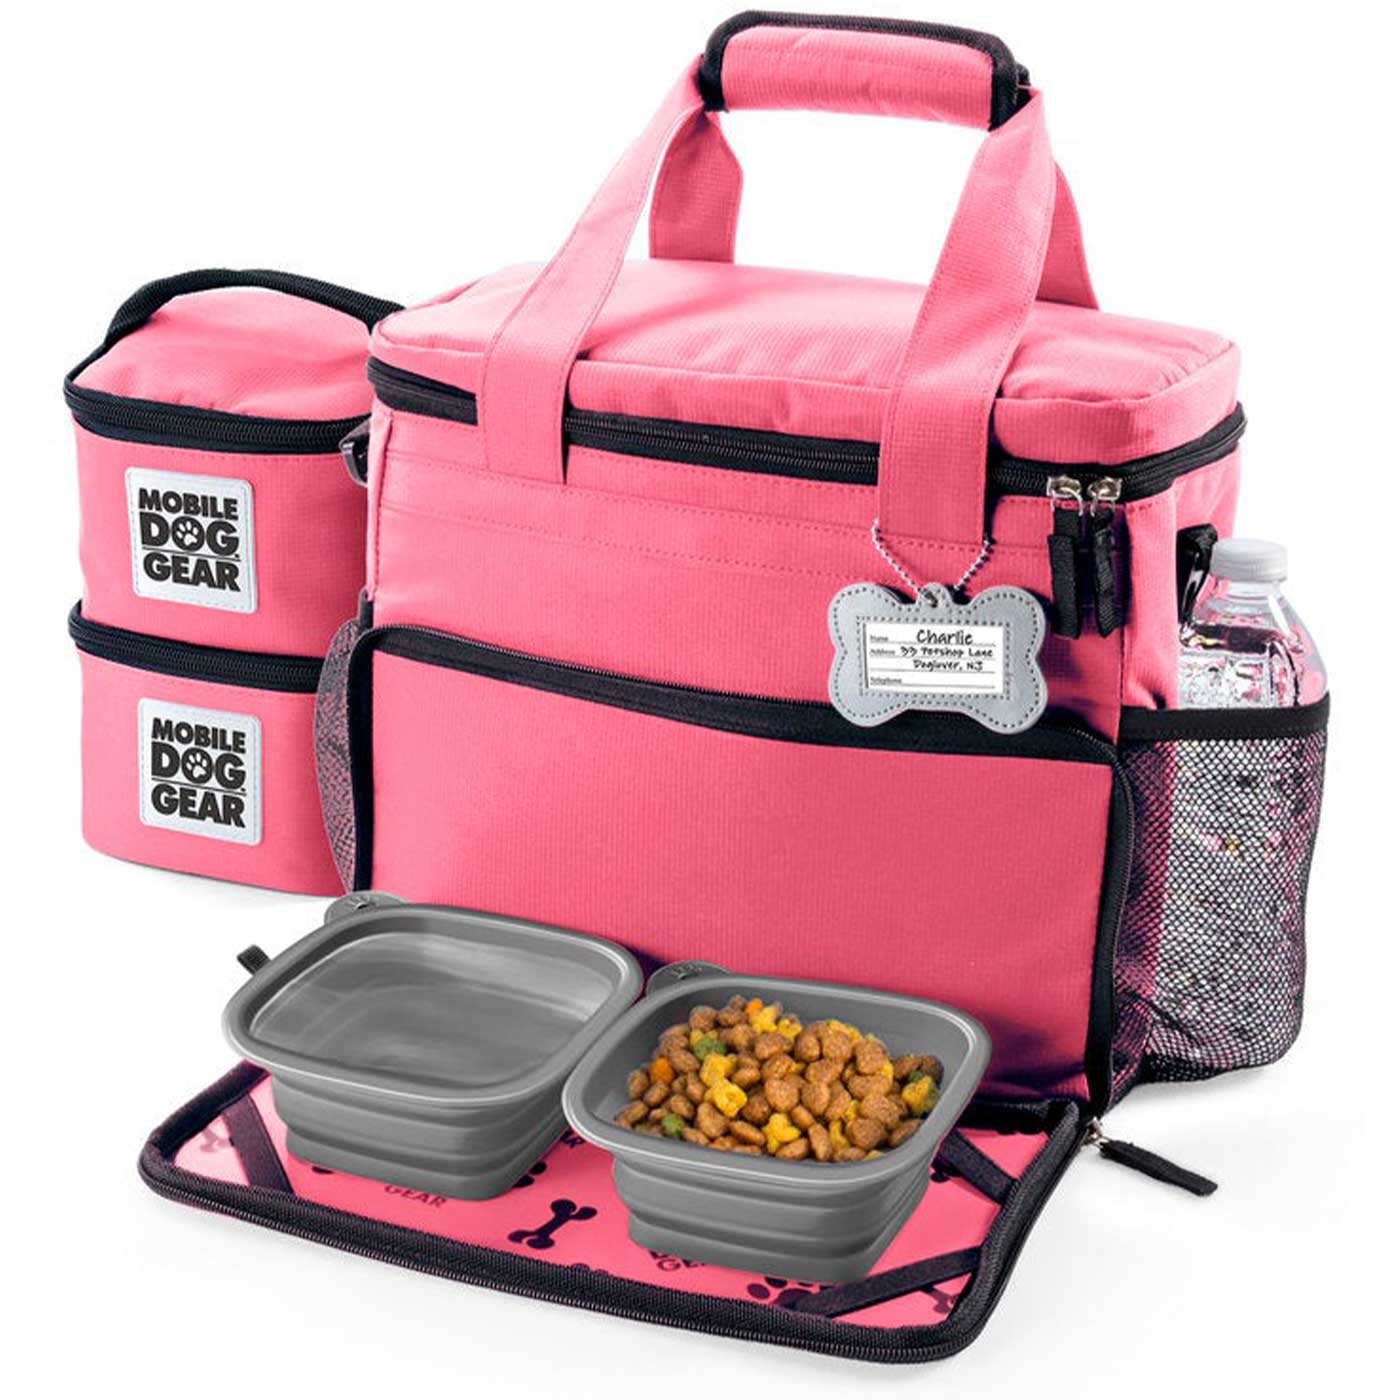 Discover, Mobile Dog Gear Week Away Bag, in Pink. The Perfect Away Bag for any Pet Parent, Featuring dividers to stack food and built in waste bag dispenser. Also Included feeding set, collapsible silicone bowls and placemat! The Perfect Gift For travel, meets airline requirements. Available Now at Lords & Labradors